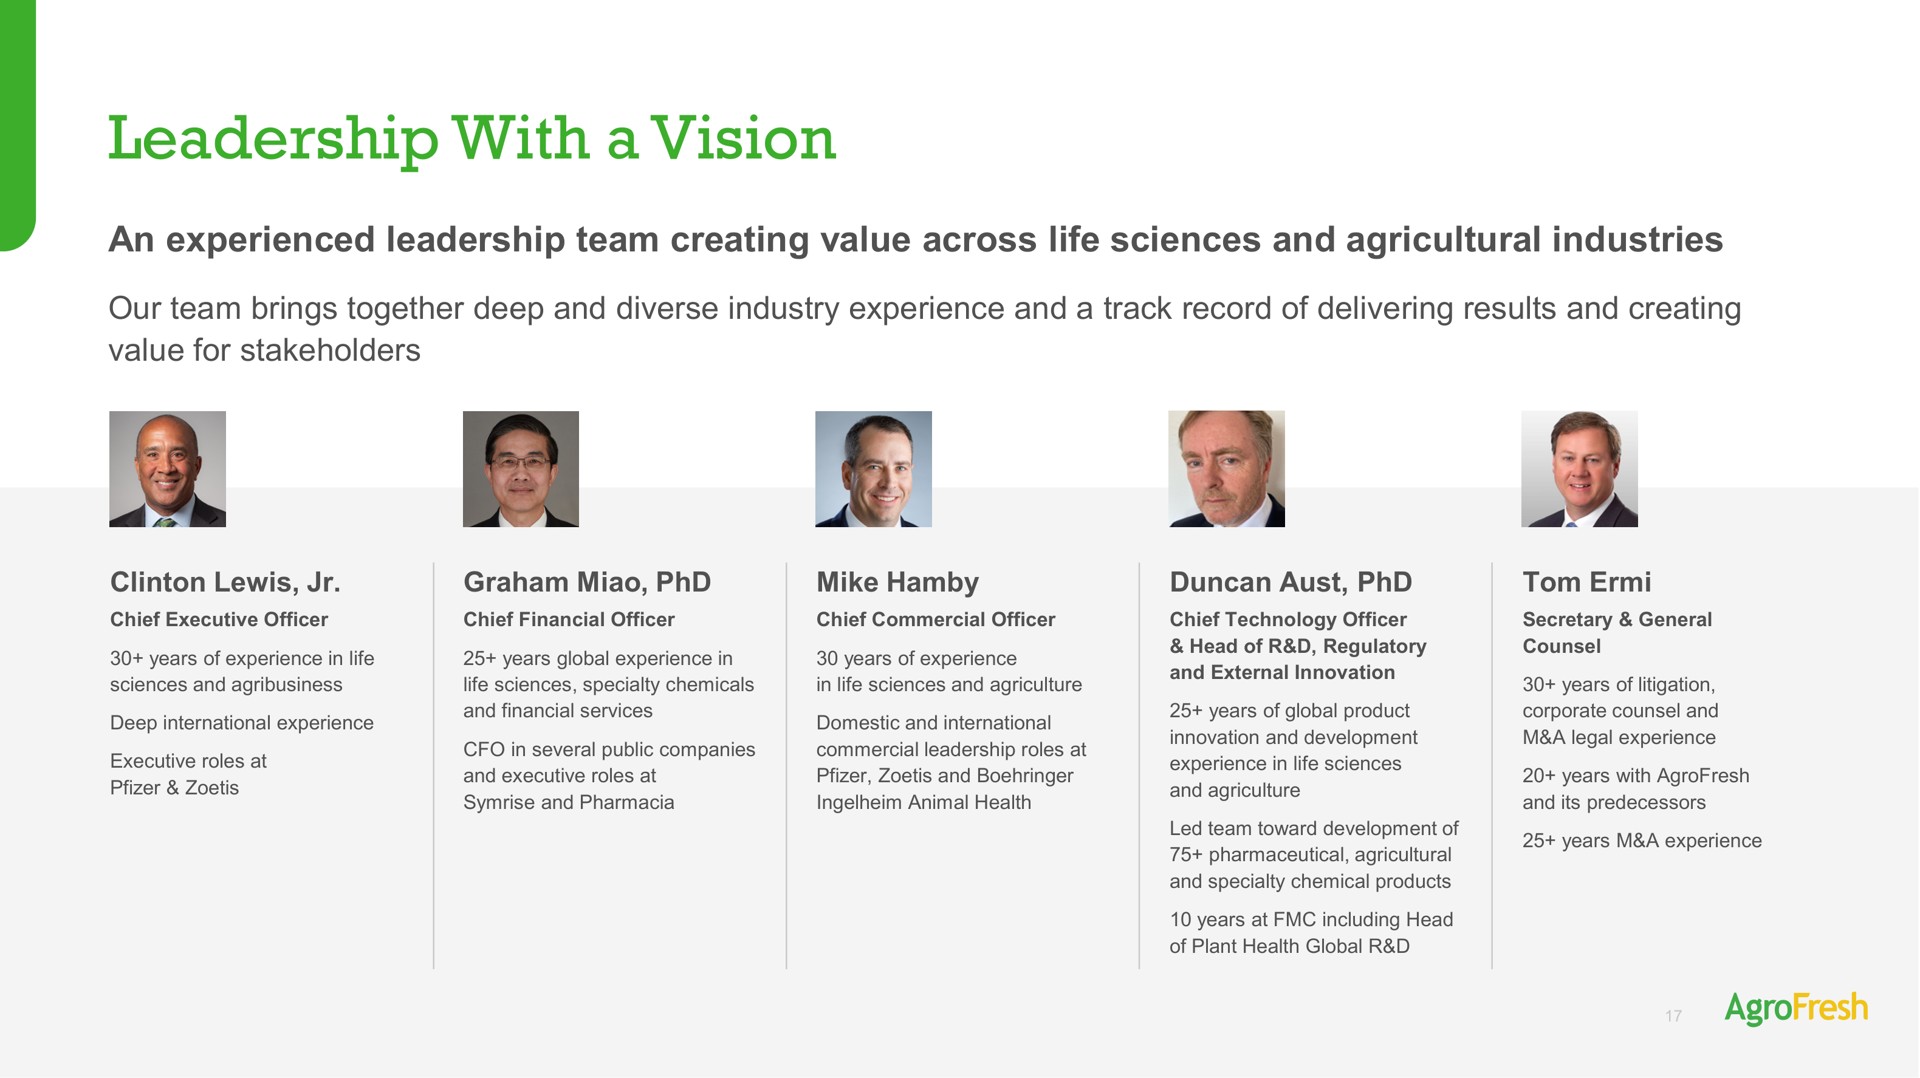 leadership with a vision | AgroFresh